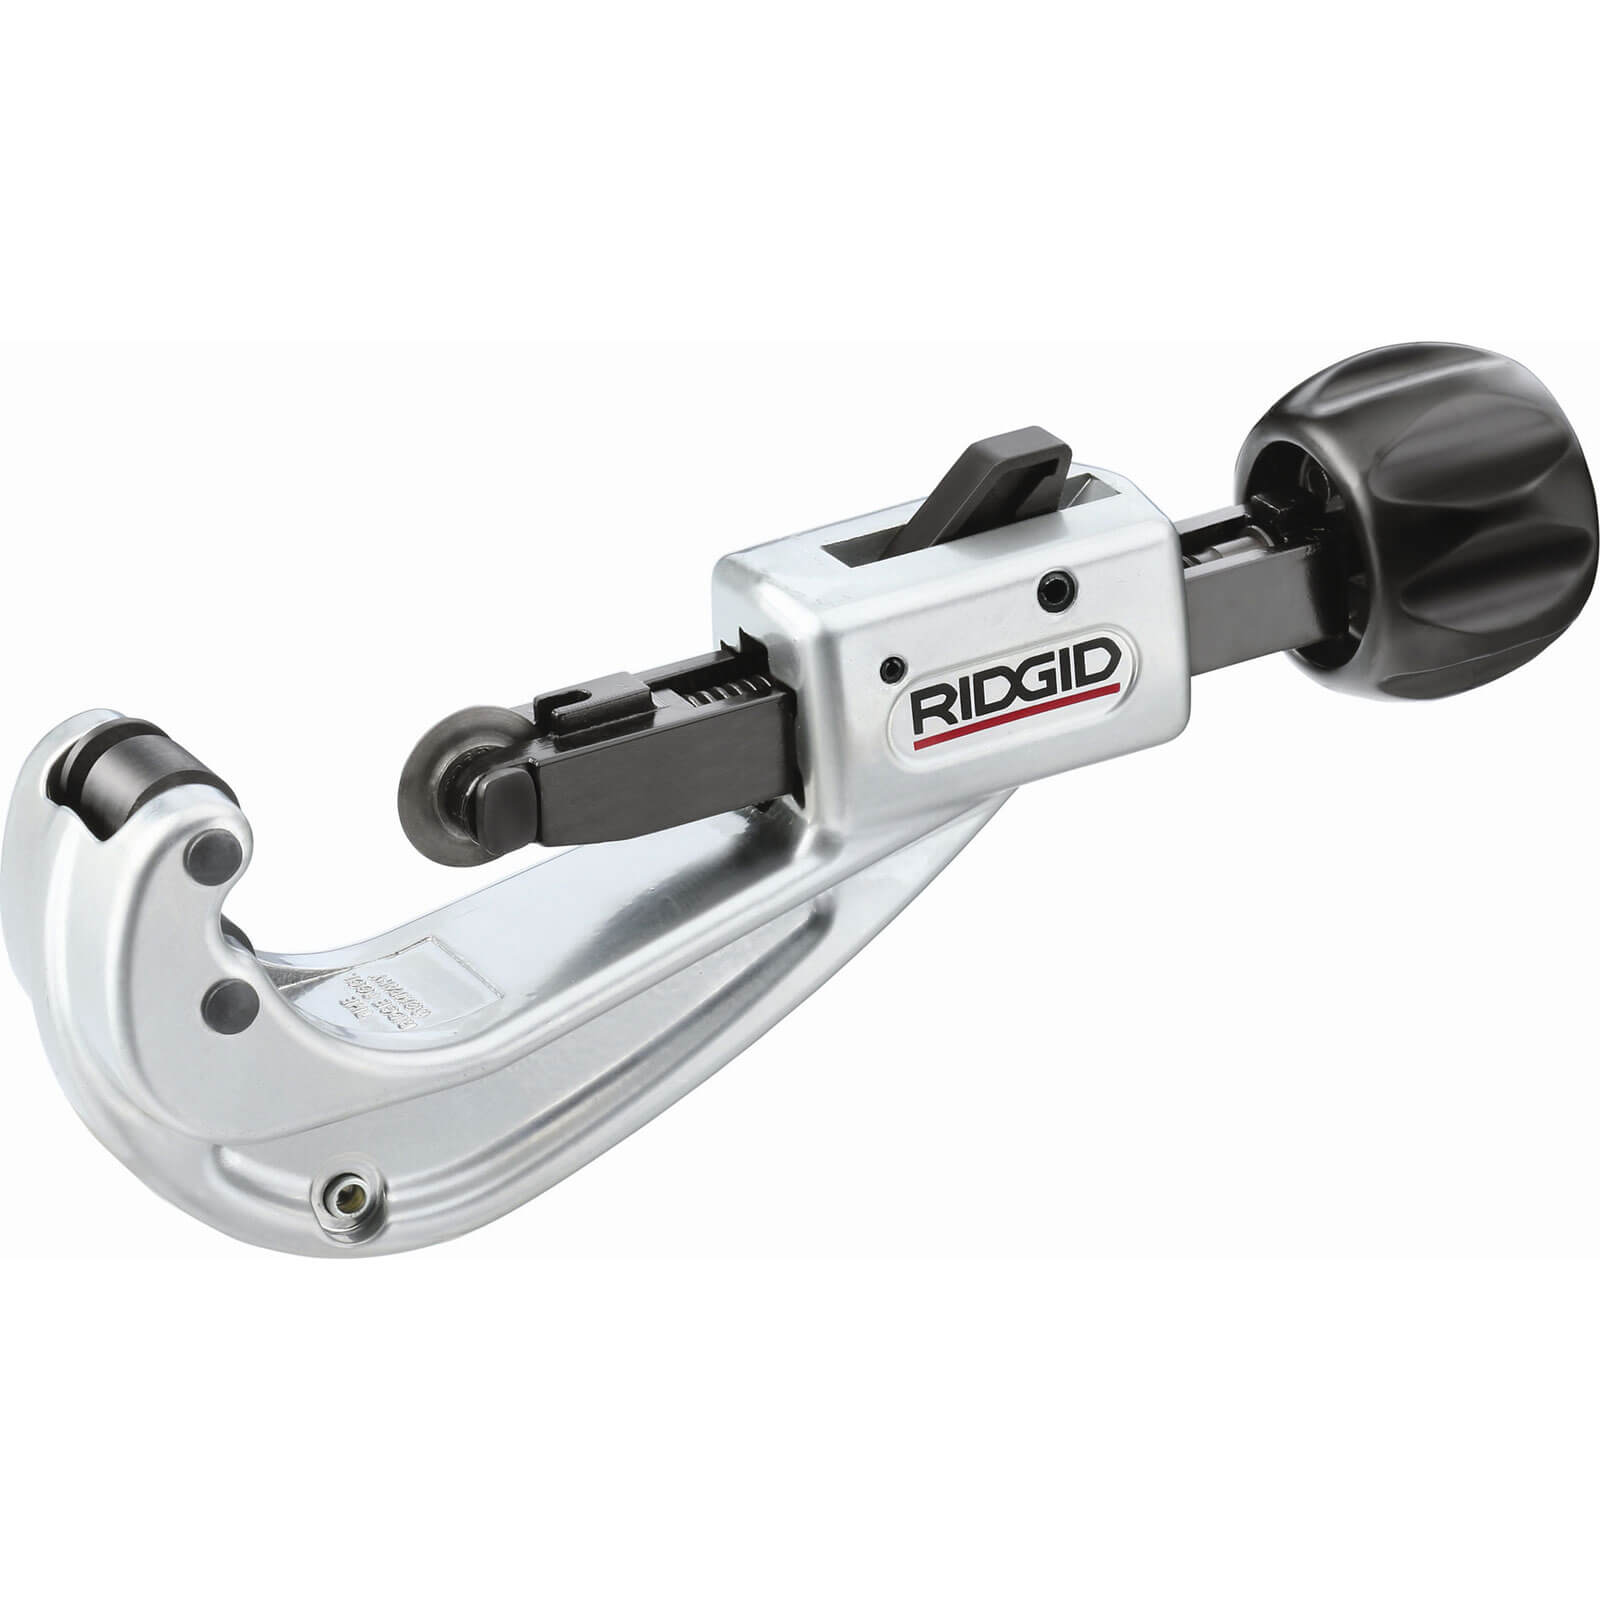 Image of Ridgid Quick Acting Platic Pipe Cutter 10mm - 63mm